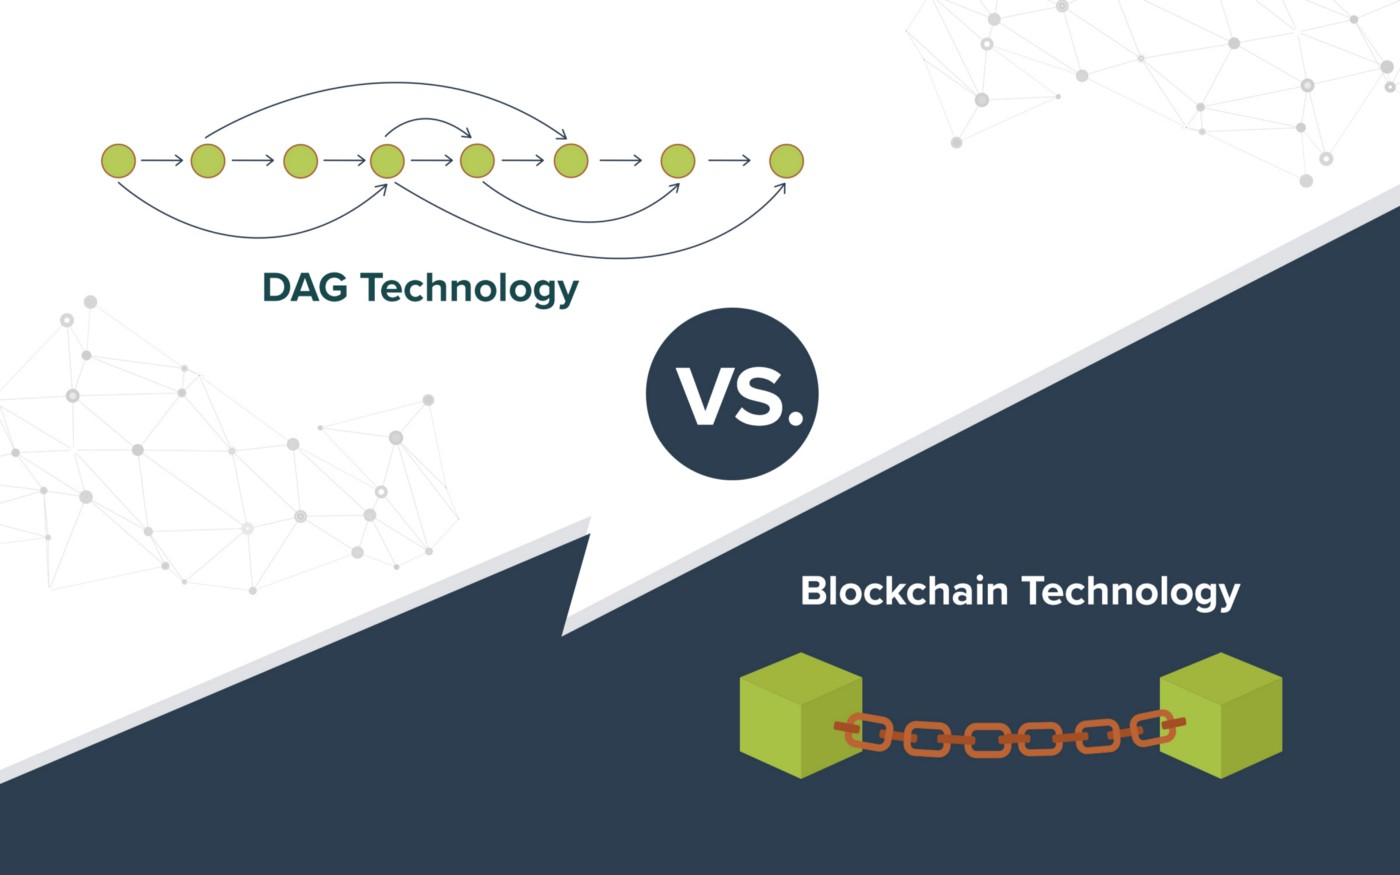 @cryptosimplify/dags-what-are-they-and-how-do-they-work